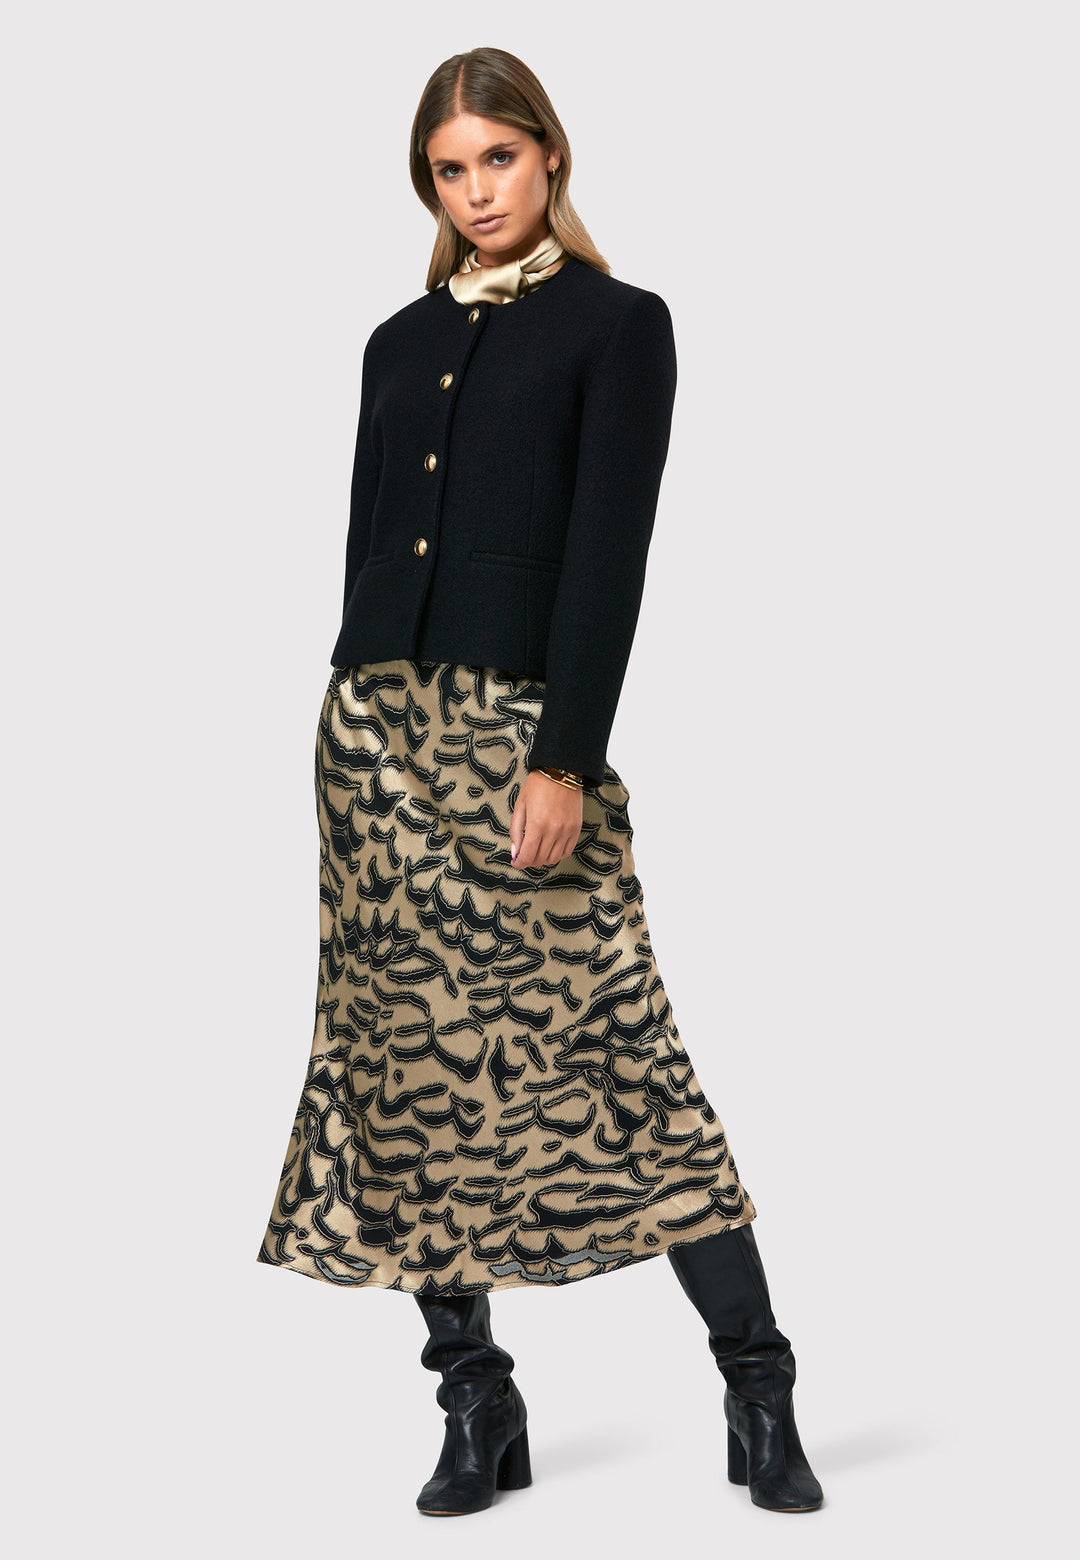 Indulge in the Peyton Devore Bias Skirt, a stylish mid-calf length skirt designed to flatter your figure. With a high-waisted silhouette and a striking black and gold devore patterned satin, it adds a touch of glamour to your look. The form-flattering cut enhances your silhouette, while the side seam zip ensures easy and comfortable wearing. Versatile and chic, the Peyton Devore Bias Skirt is your go-to choice for various occasions, effortlessly elevating your style with a touch of sophistication.